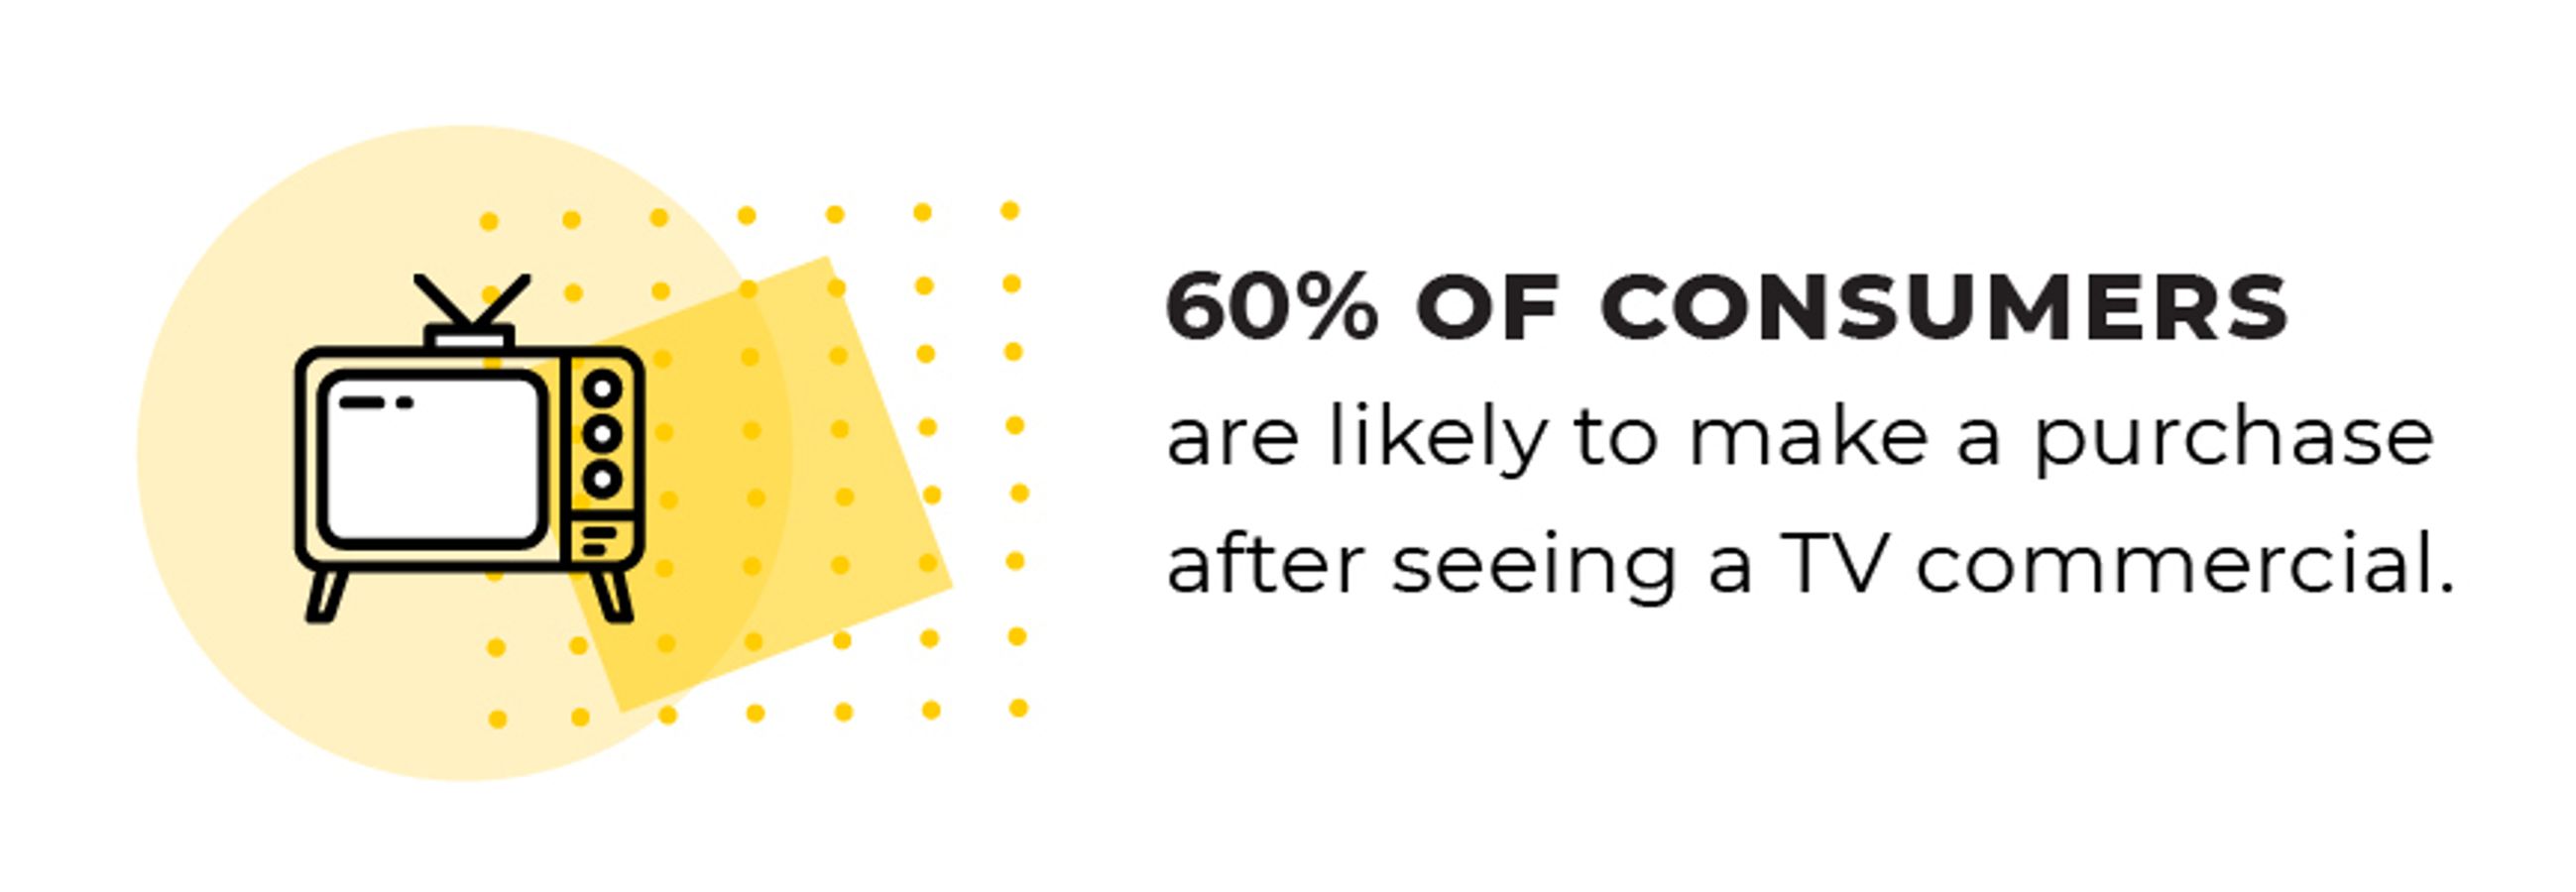 60% of consumers are likely to make a purchase after seeing a TV commercial.